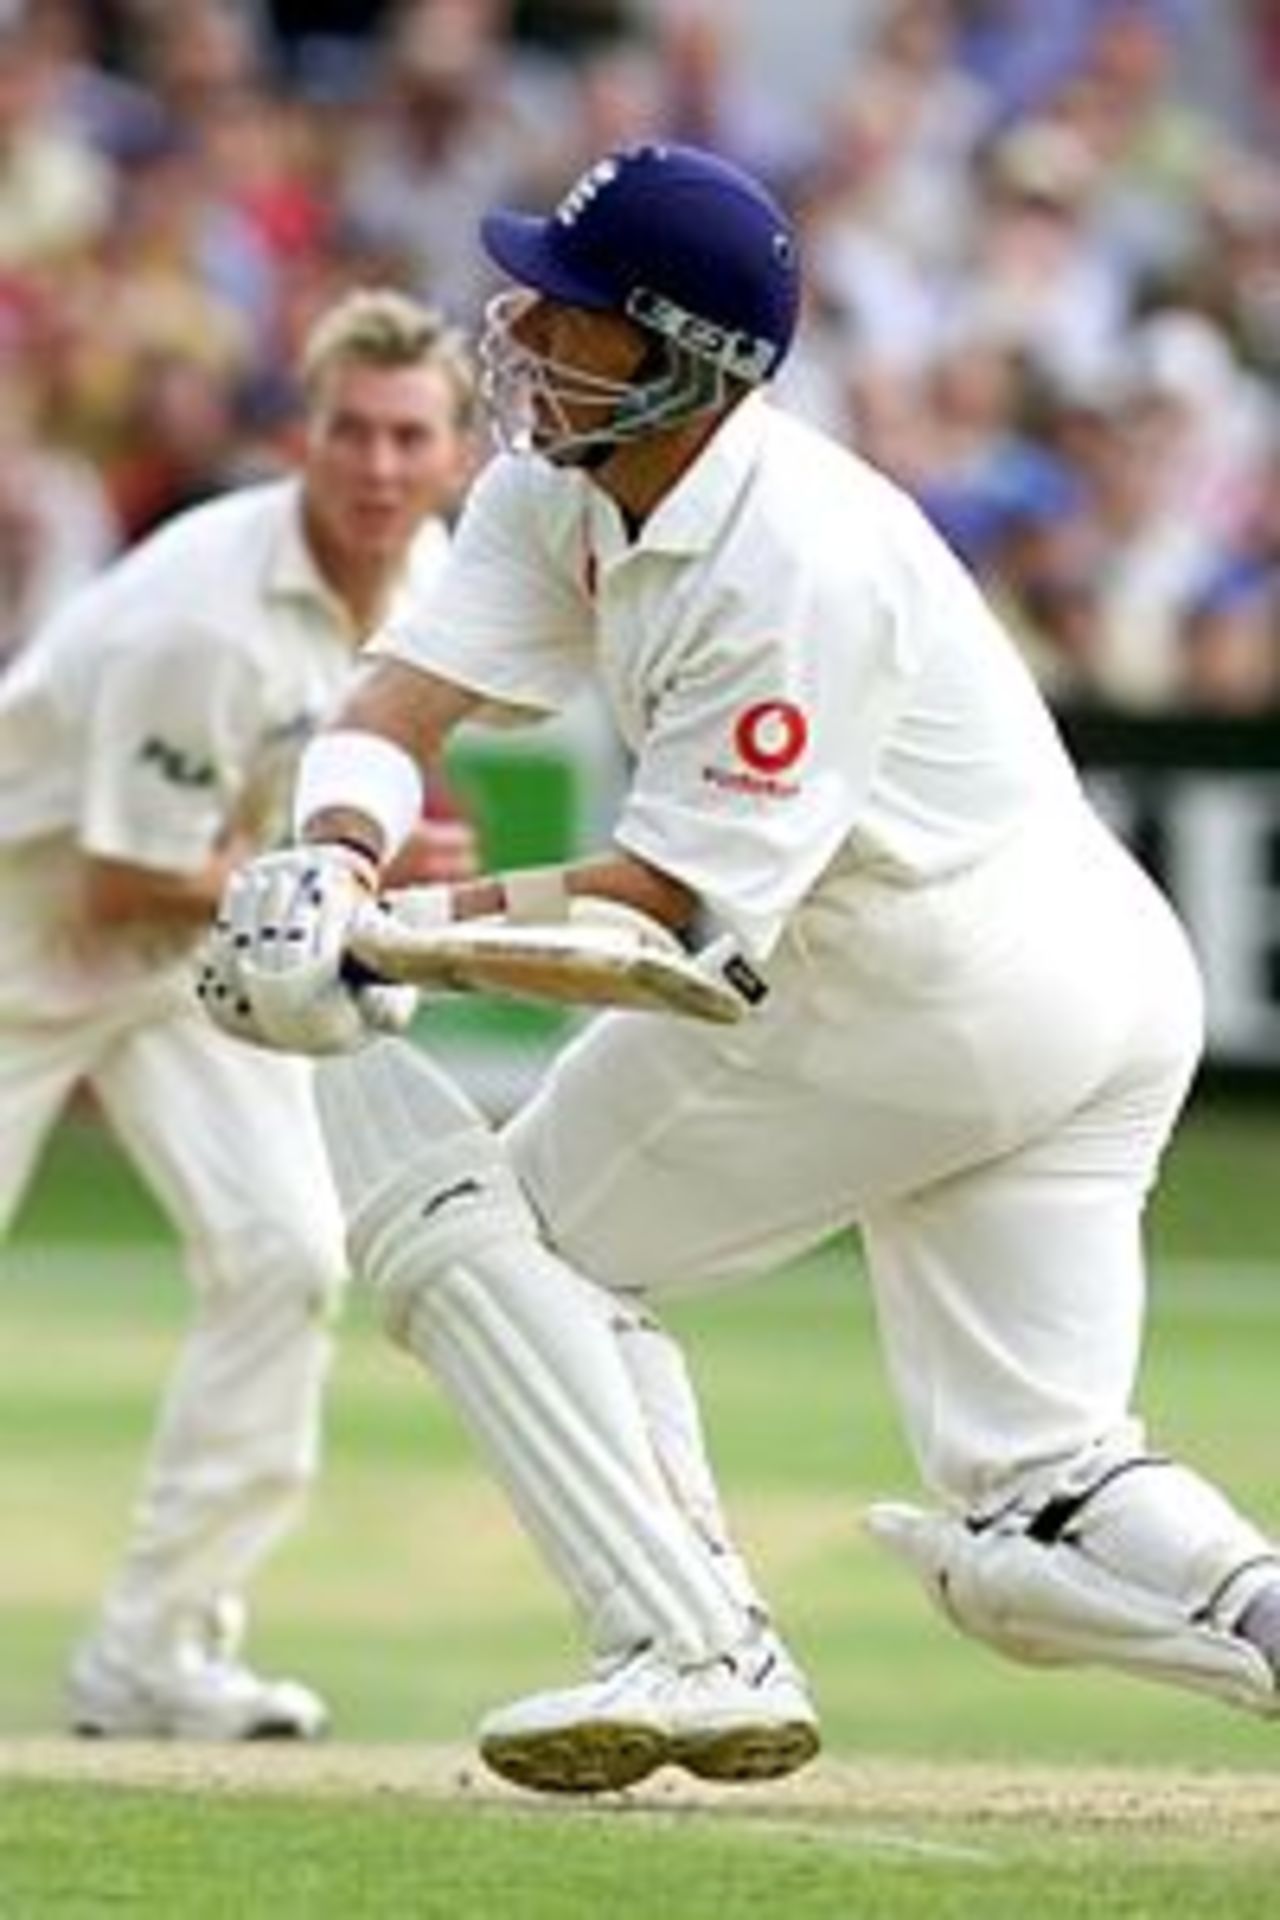 18 Aug 2001: Alec Stewart of England smashes Brett Lee of Australia during the 3rd day of the 4th Test Match between England and Australia at Headingley.